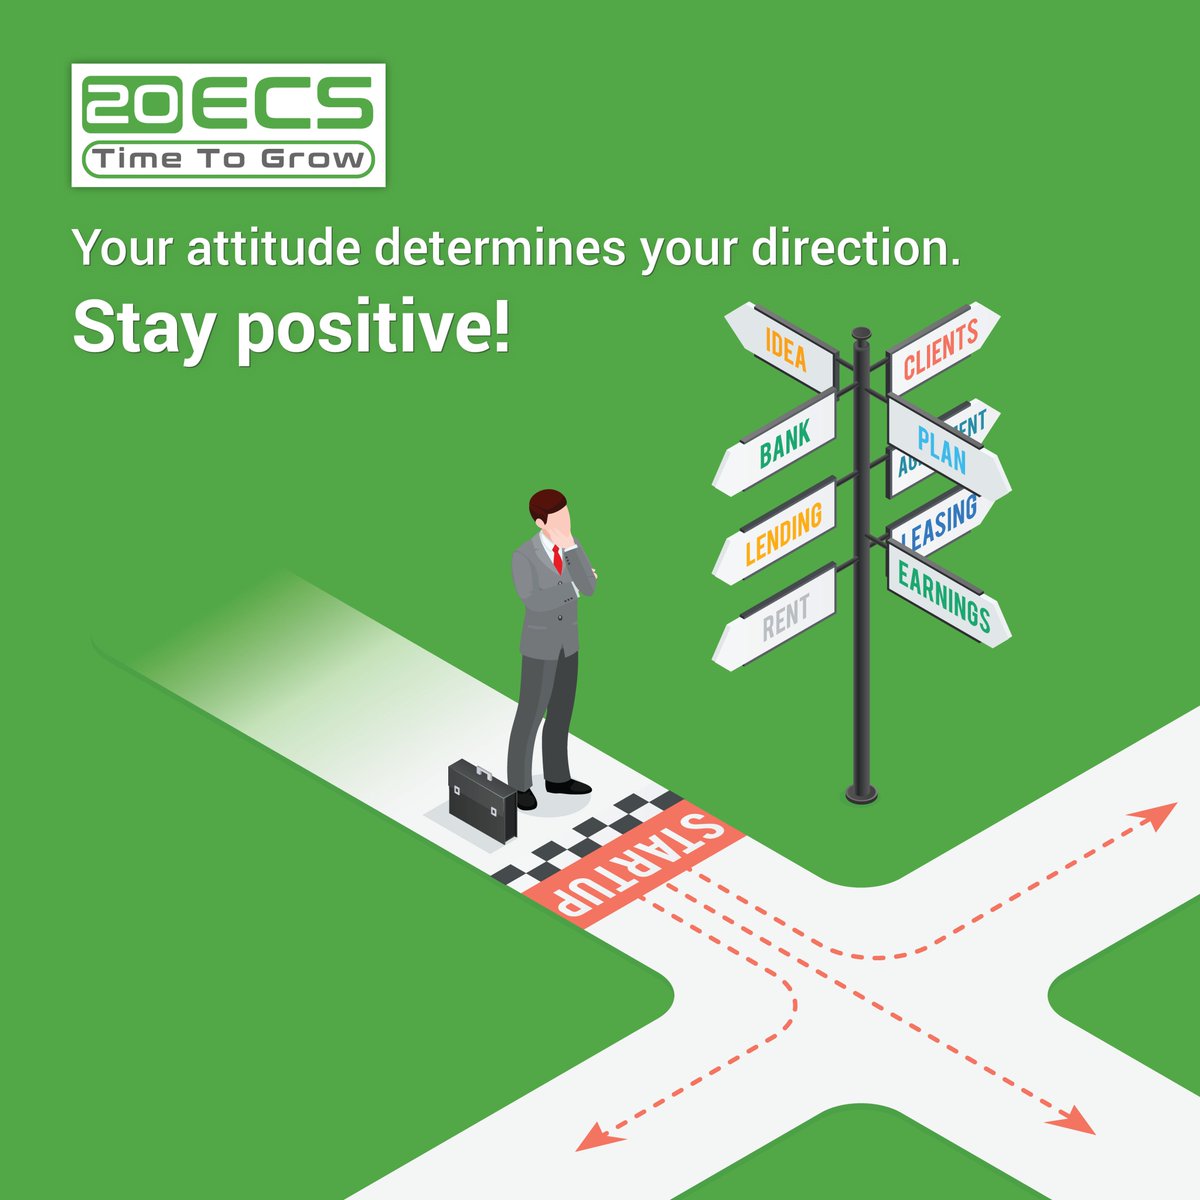 Embrace positivity and watch your journey unfold in the direction you desire. Your attitude is the compass guiding you towards success.

#20Ecs #PositiveAttitude #PositiveDirection #StayPositive #20EcsTeam #AttitudeIsKey #PositivityWins #MindsetMatters #PositiveOutlook